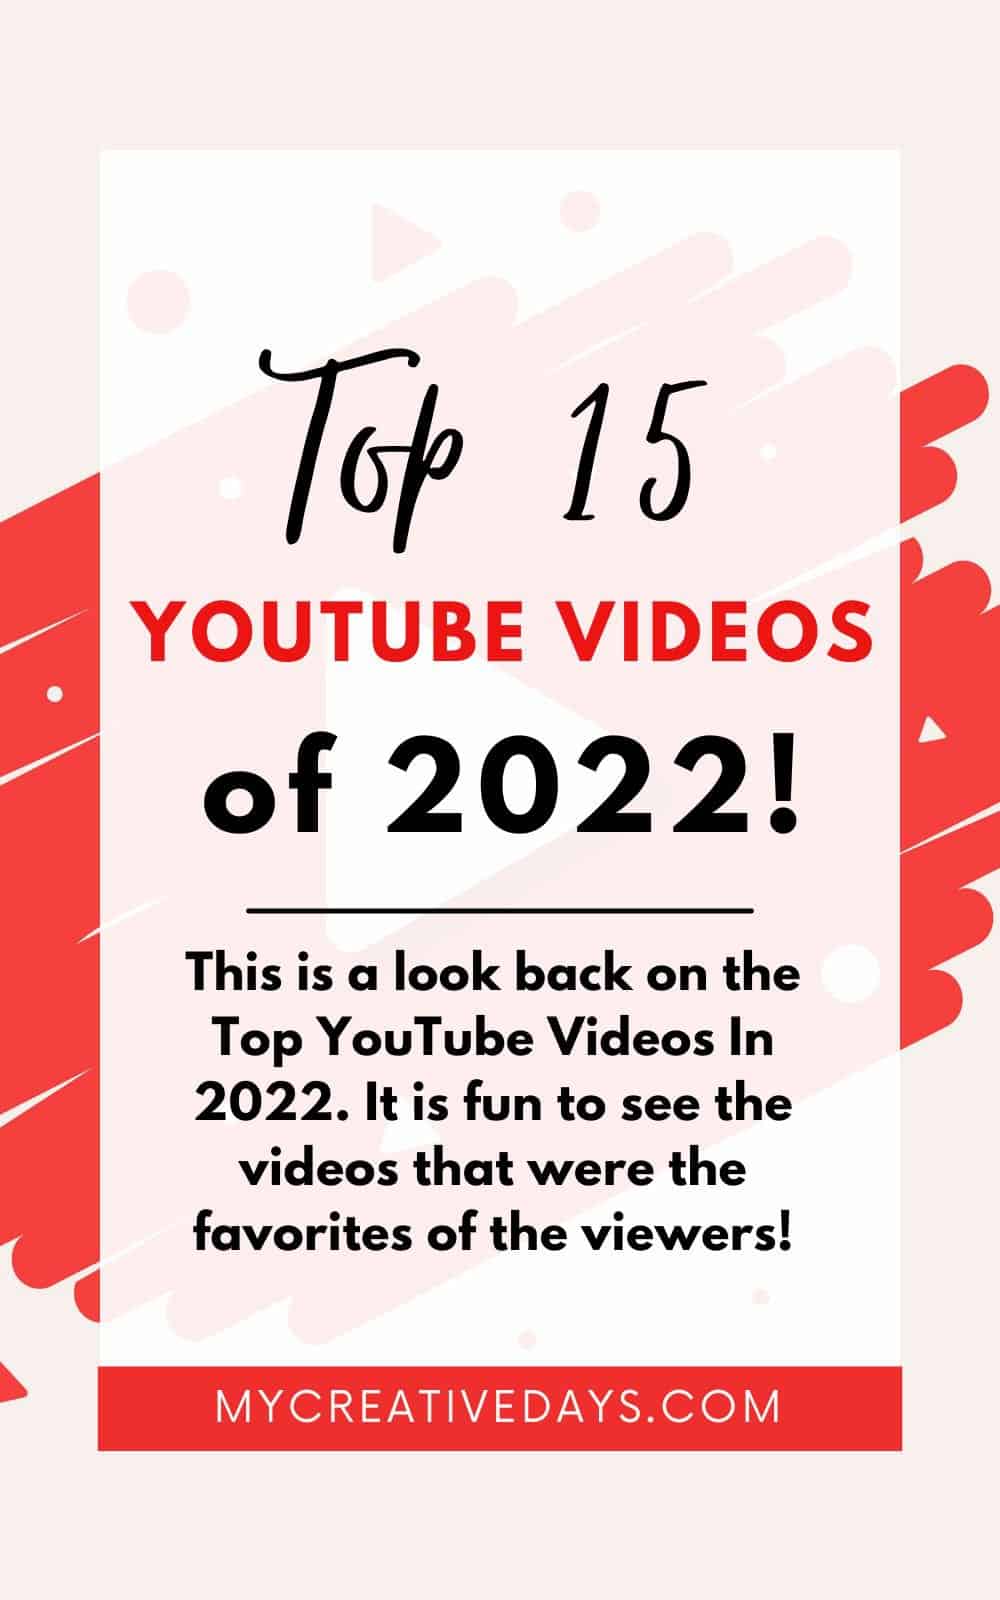 This is a look back on the Top YouTube Videos In 2022. It is fun to see the videos that were the favorites of the viewers!